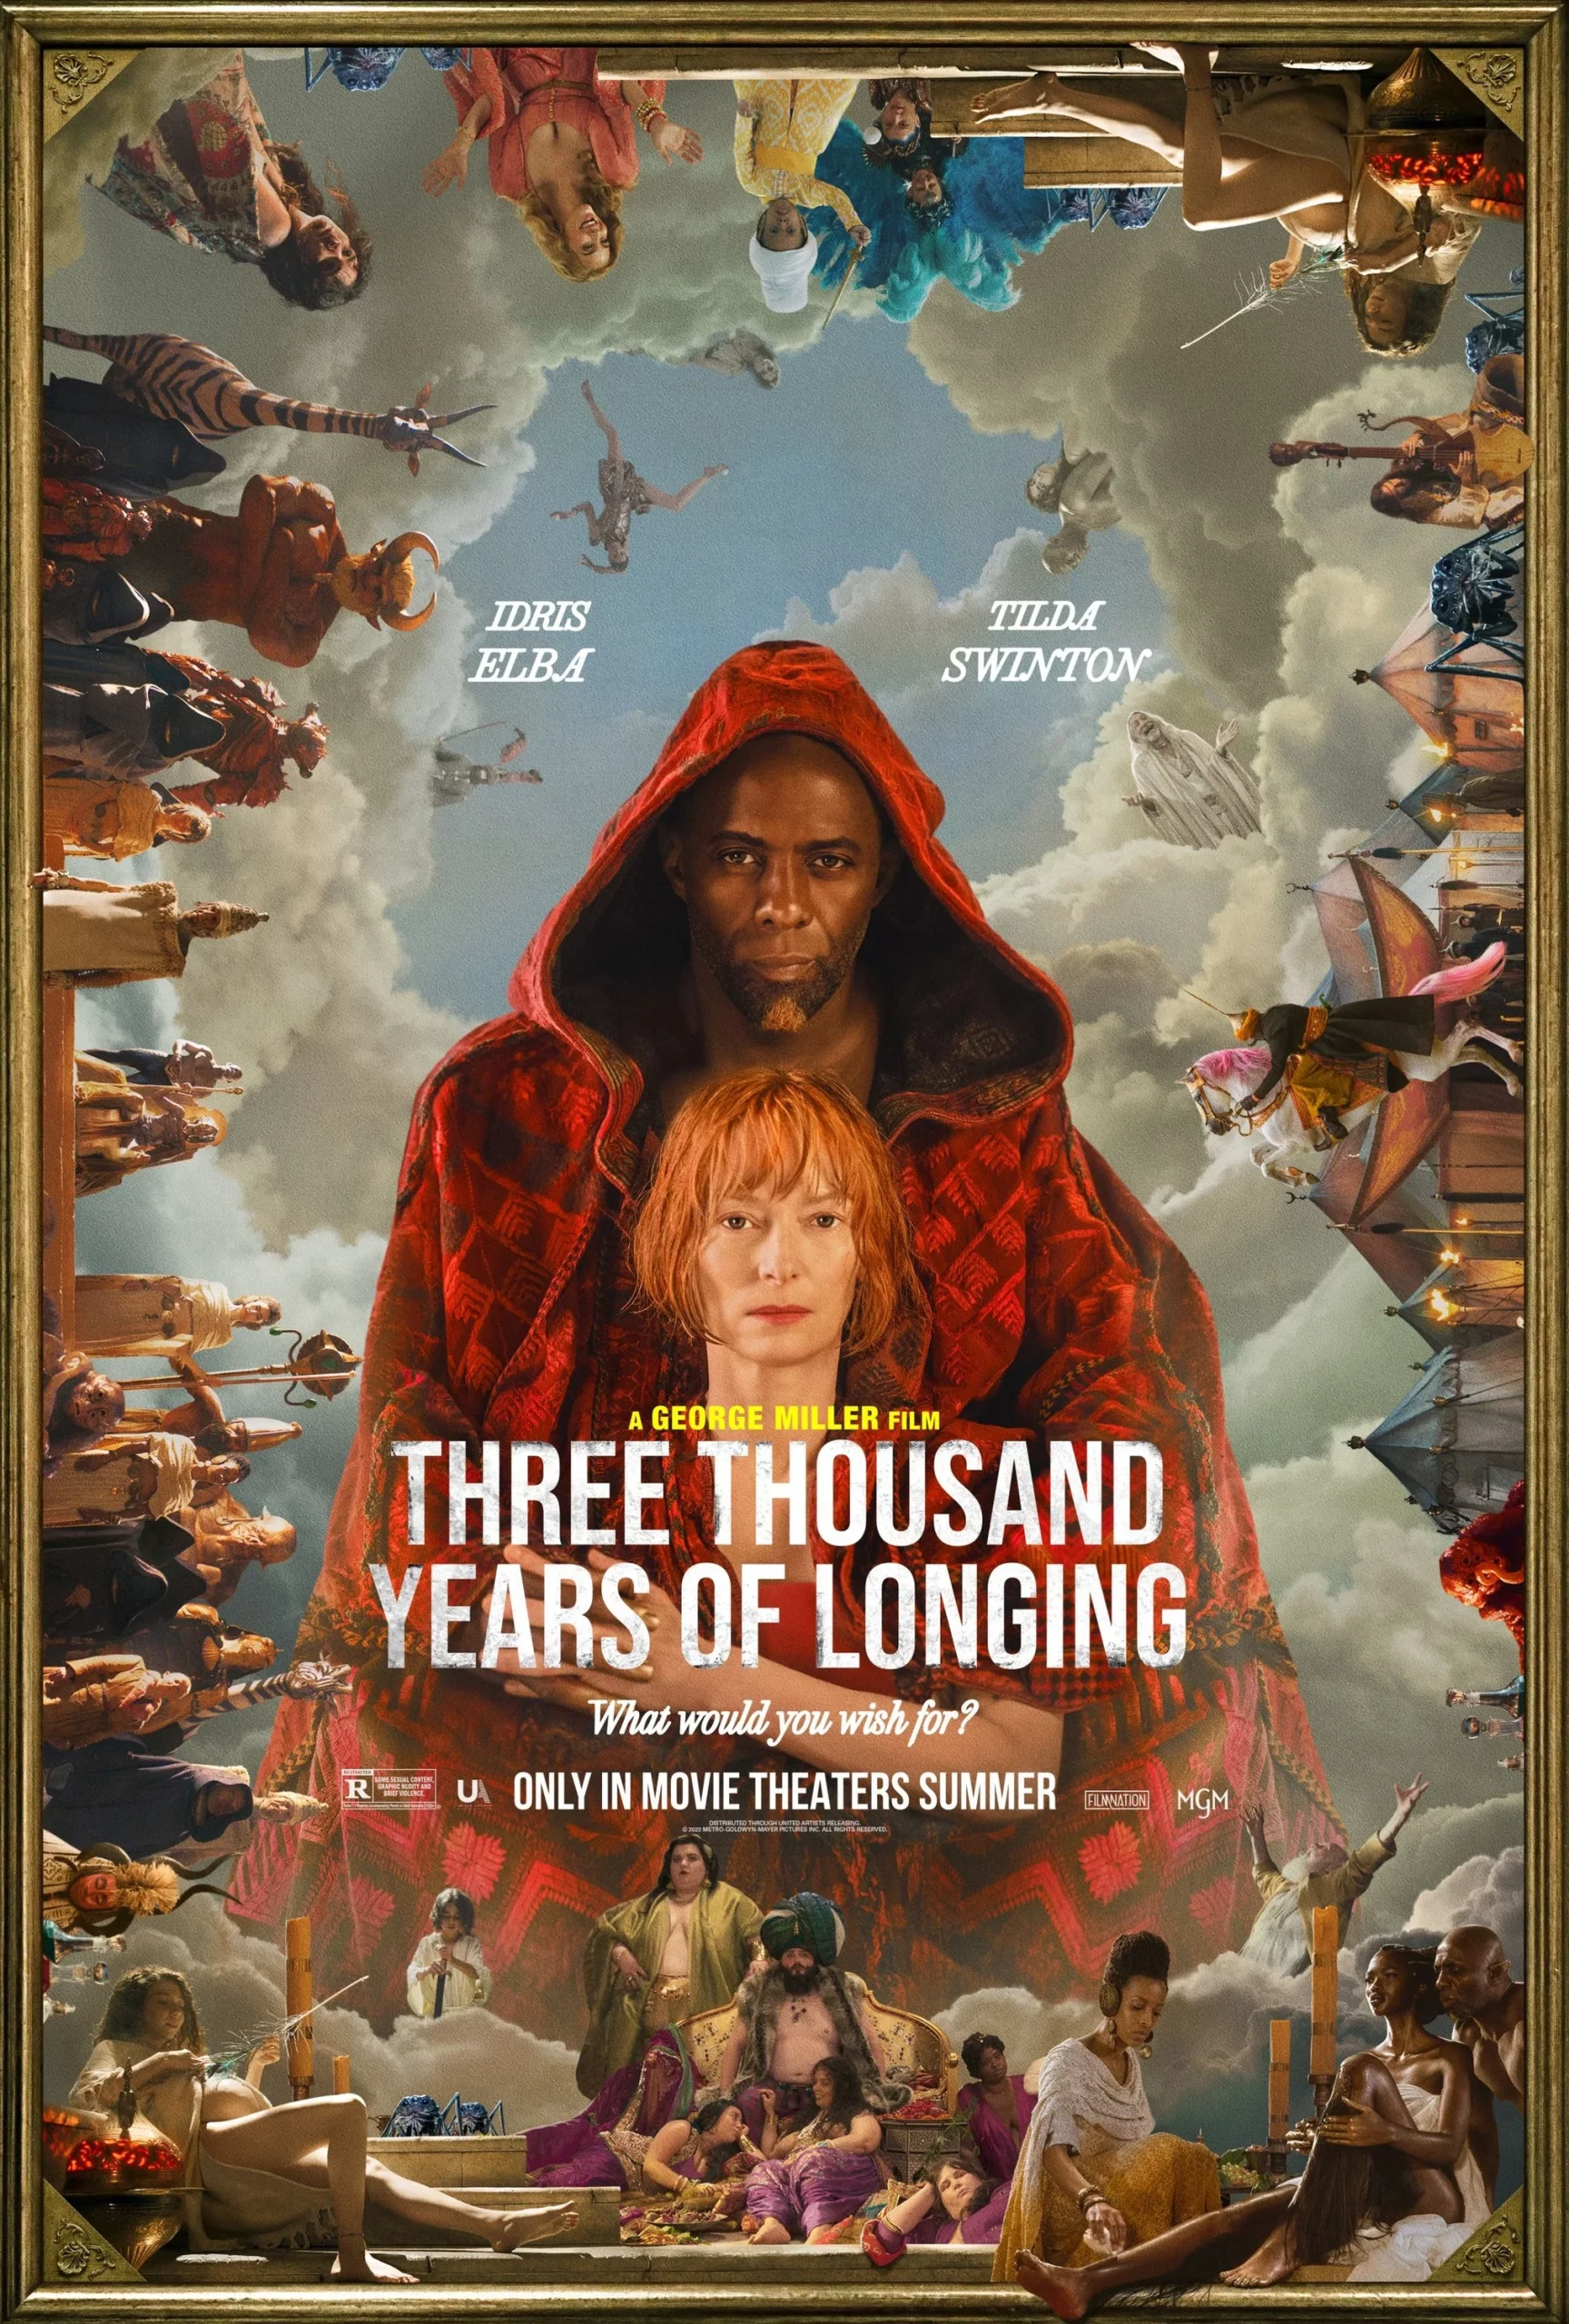 "Three Thousand Years of Longing" released Official Trailer, so you are such a lamp god!